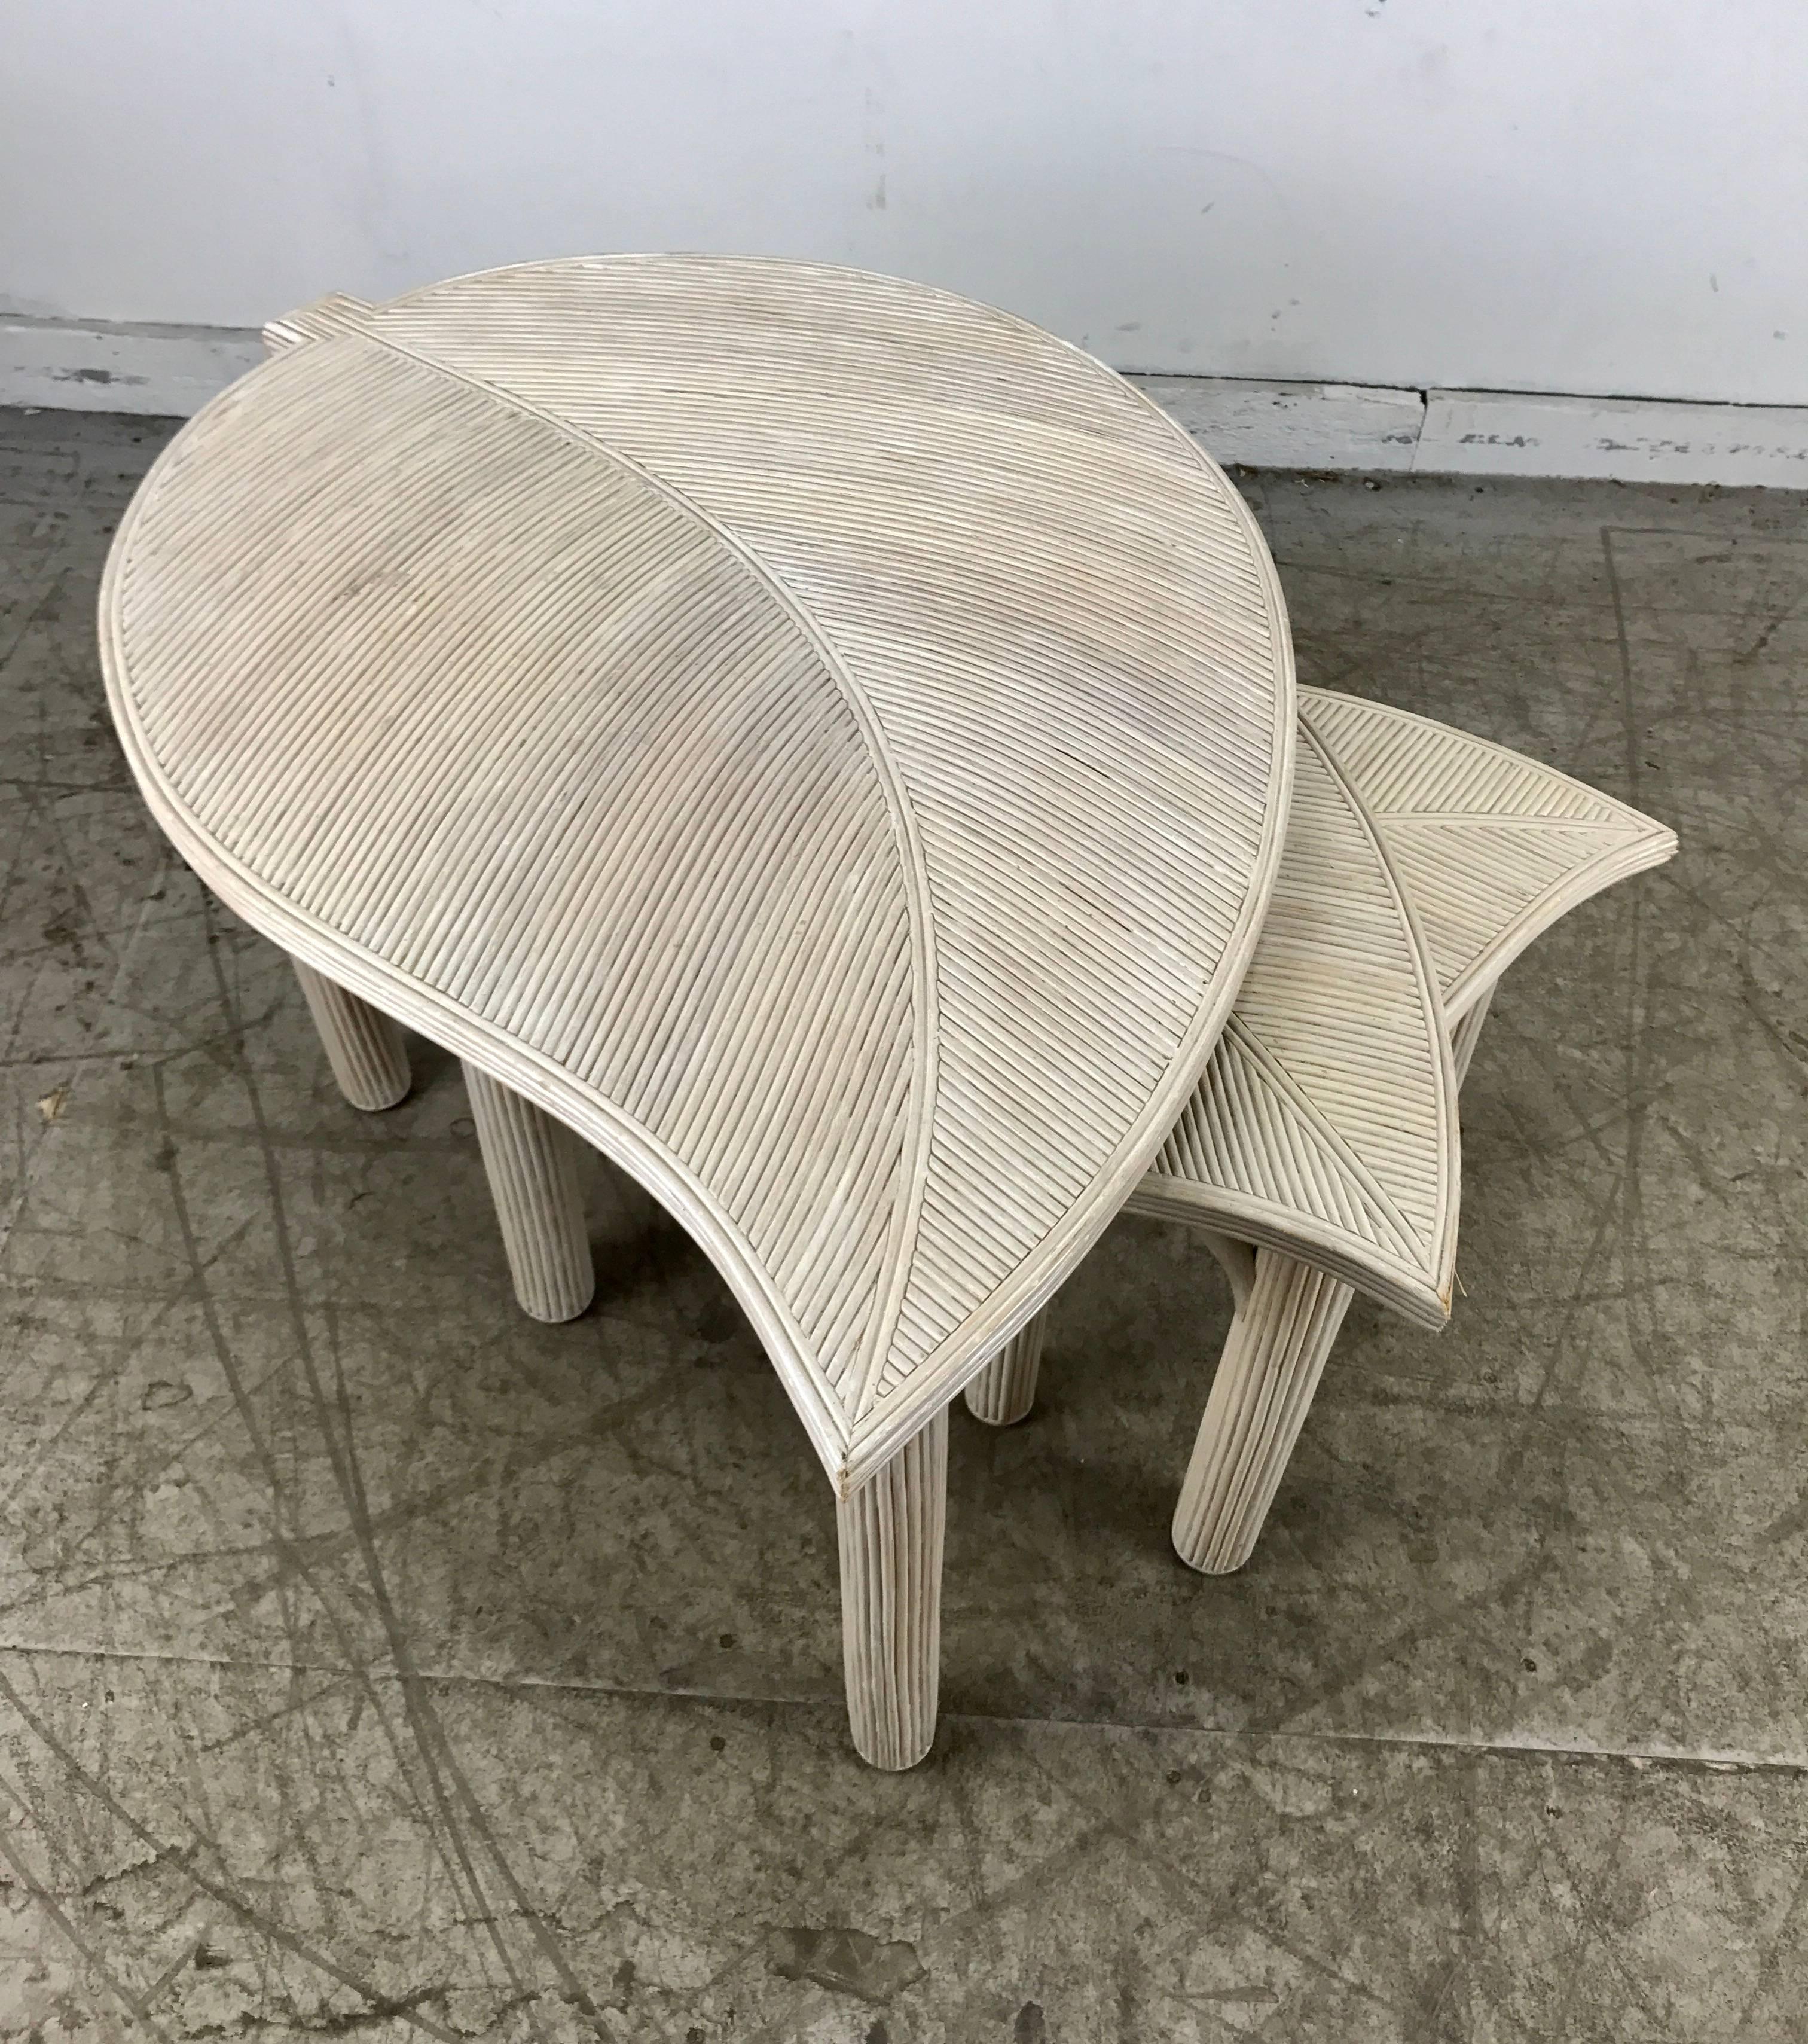 Decorative Leaf Motif Bamboo/Reed Nesting Tables Hollywood Regency In Good Condition For Sale In Buffalo, NY